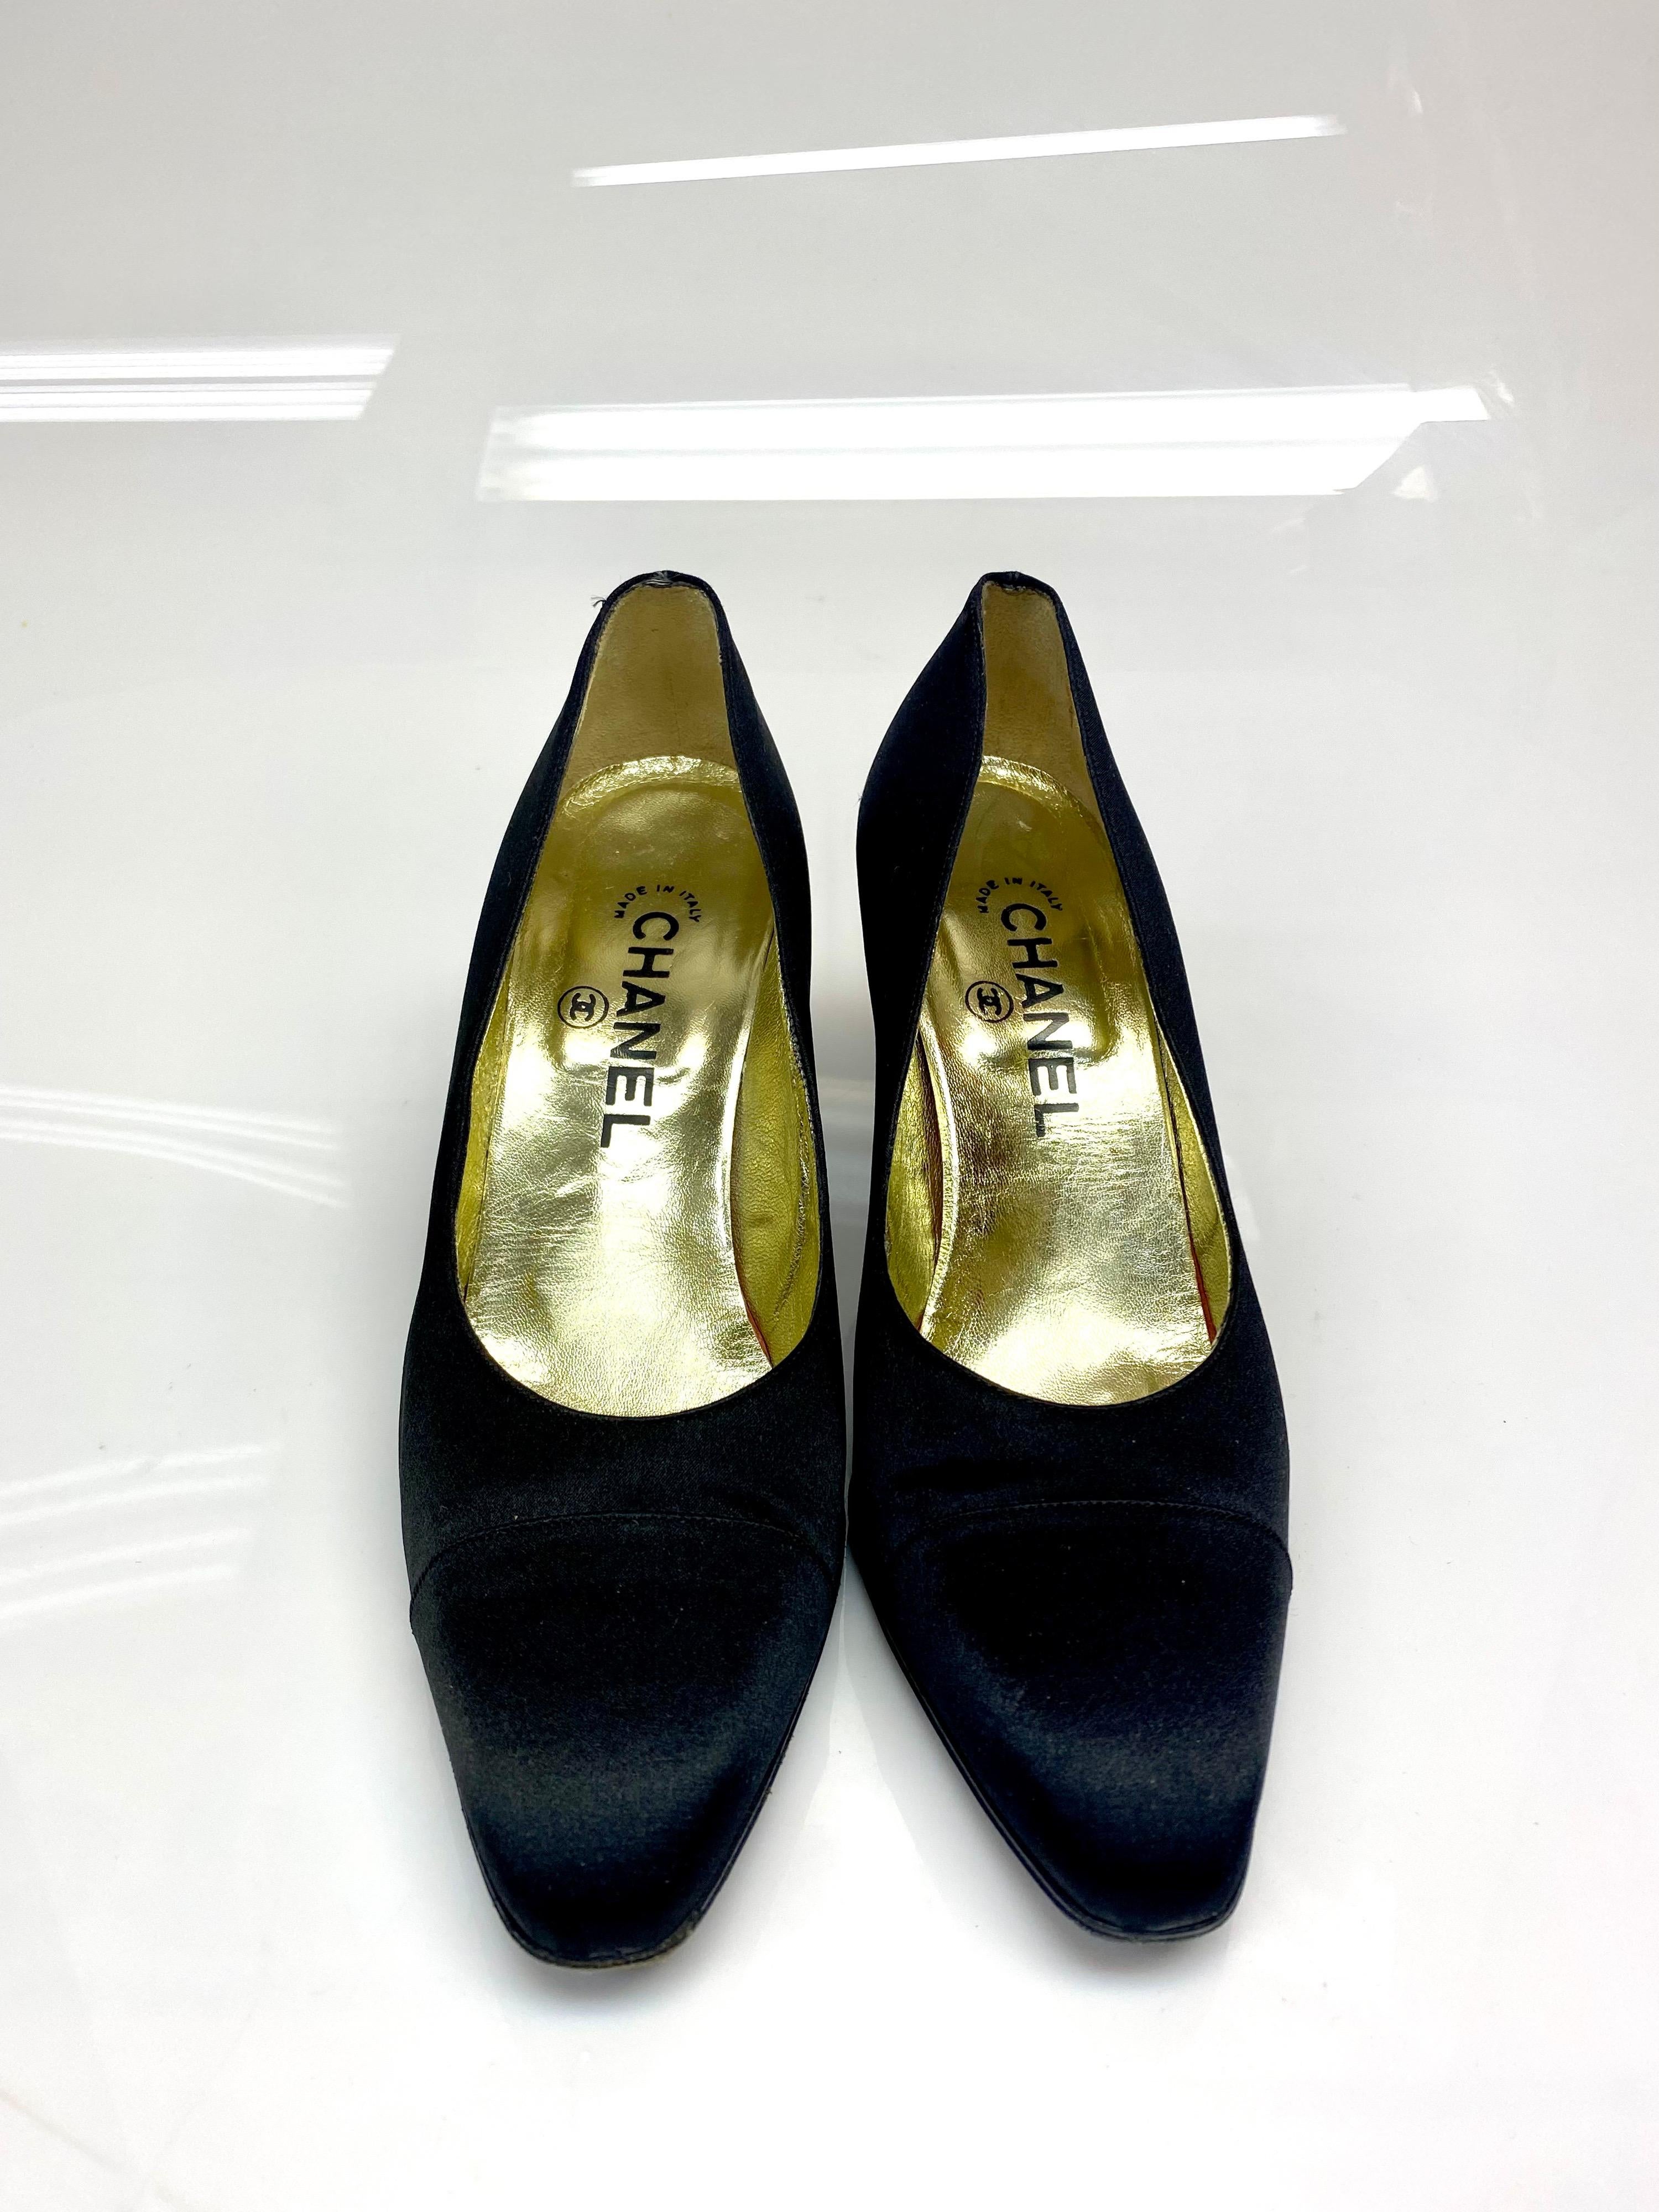 Chanel Vintage 1990’s Black Satin Pumps Size 38.5 In Good Condition For Sale In West Palm Beach, FL